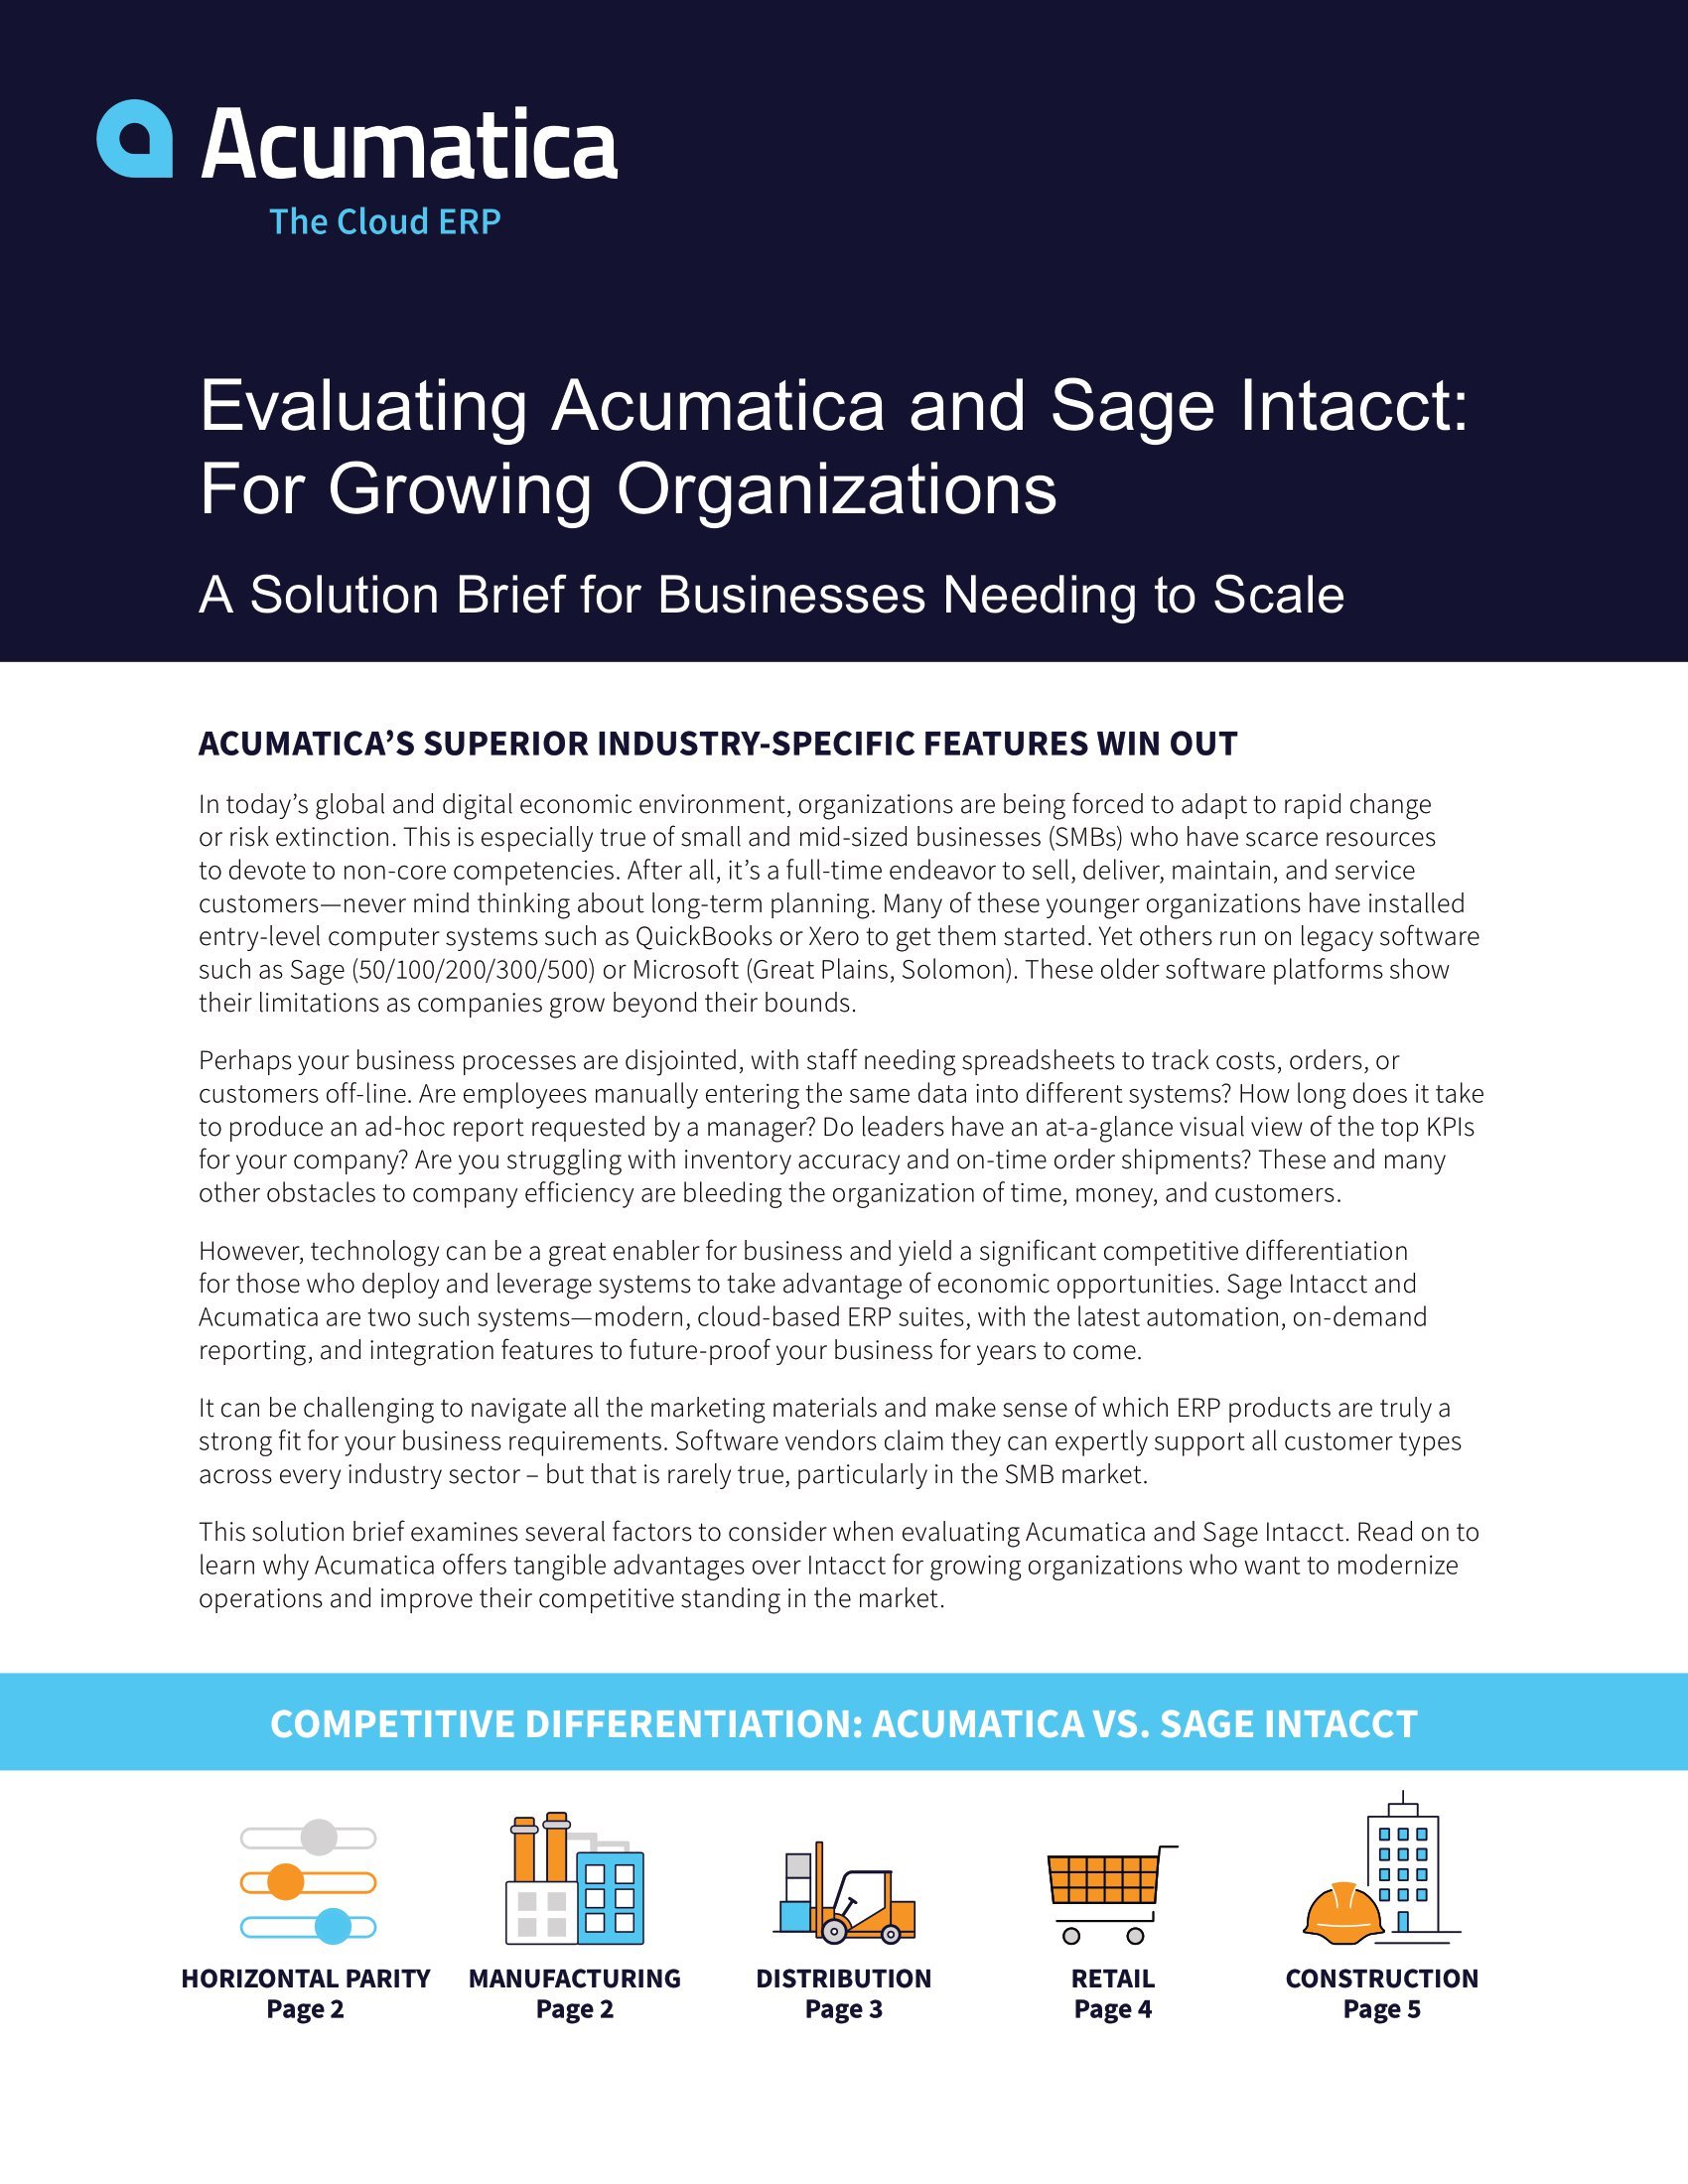 Evaluating Acumatica and Sage Intacct: Which One is Better for Growing Organizations? 